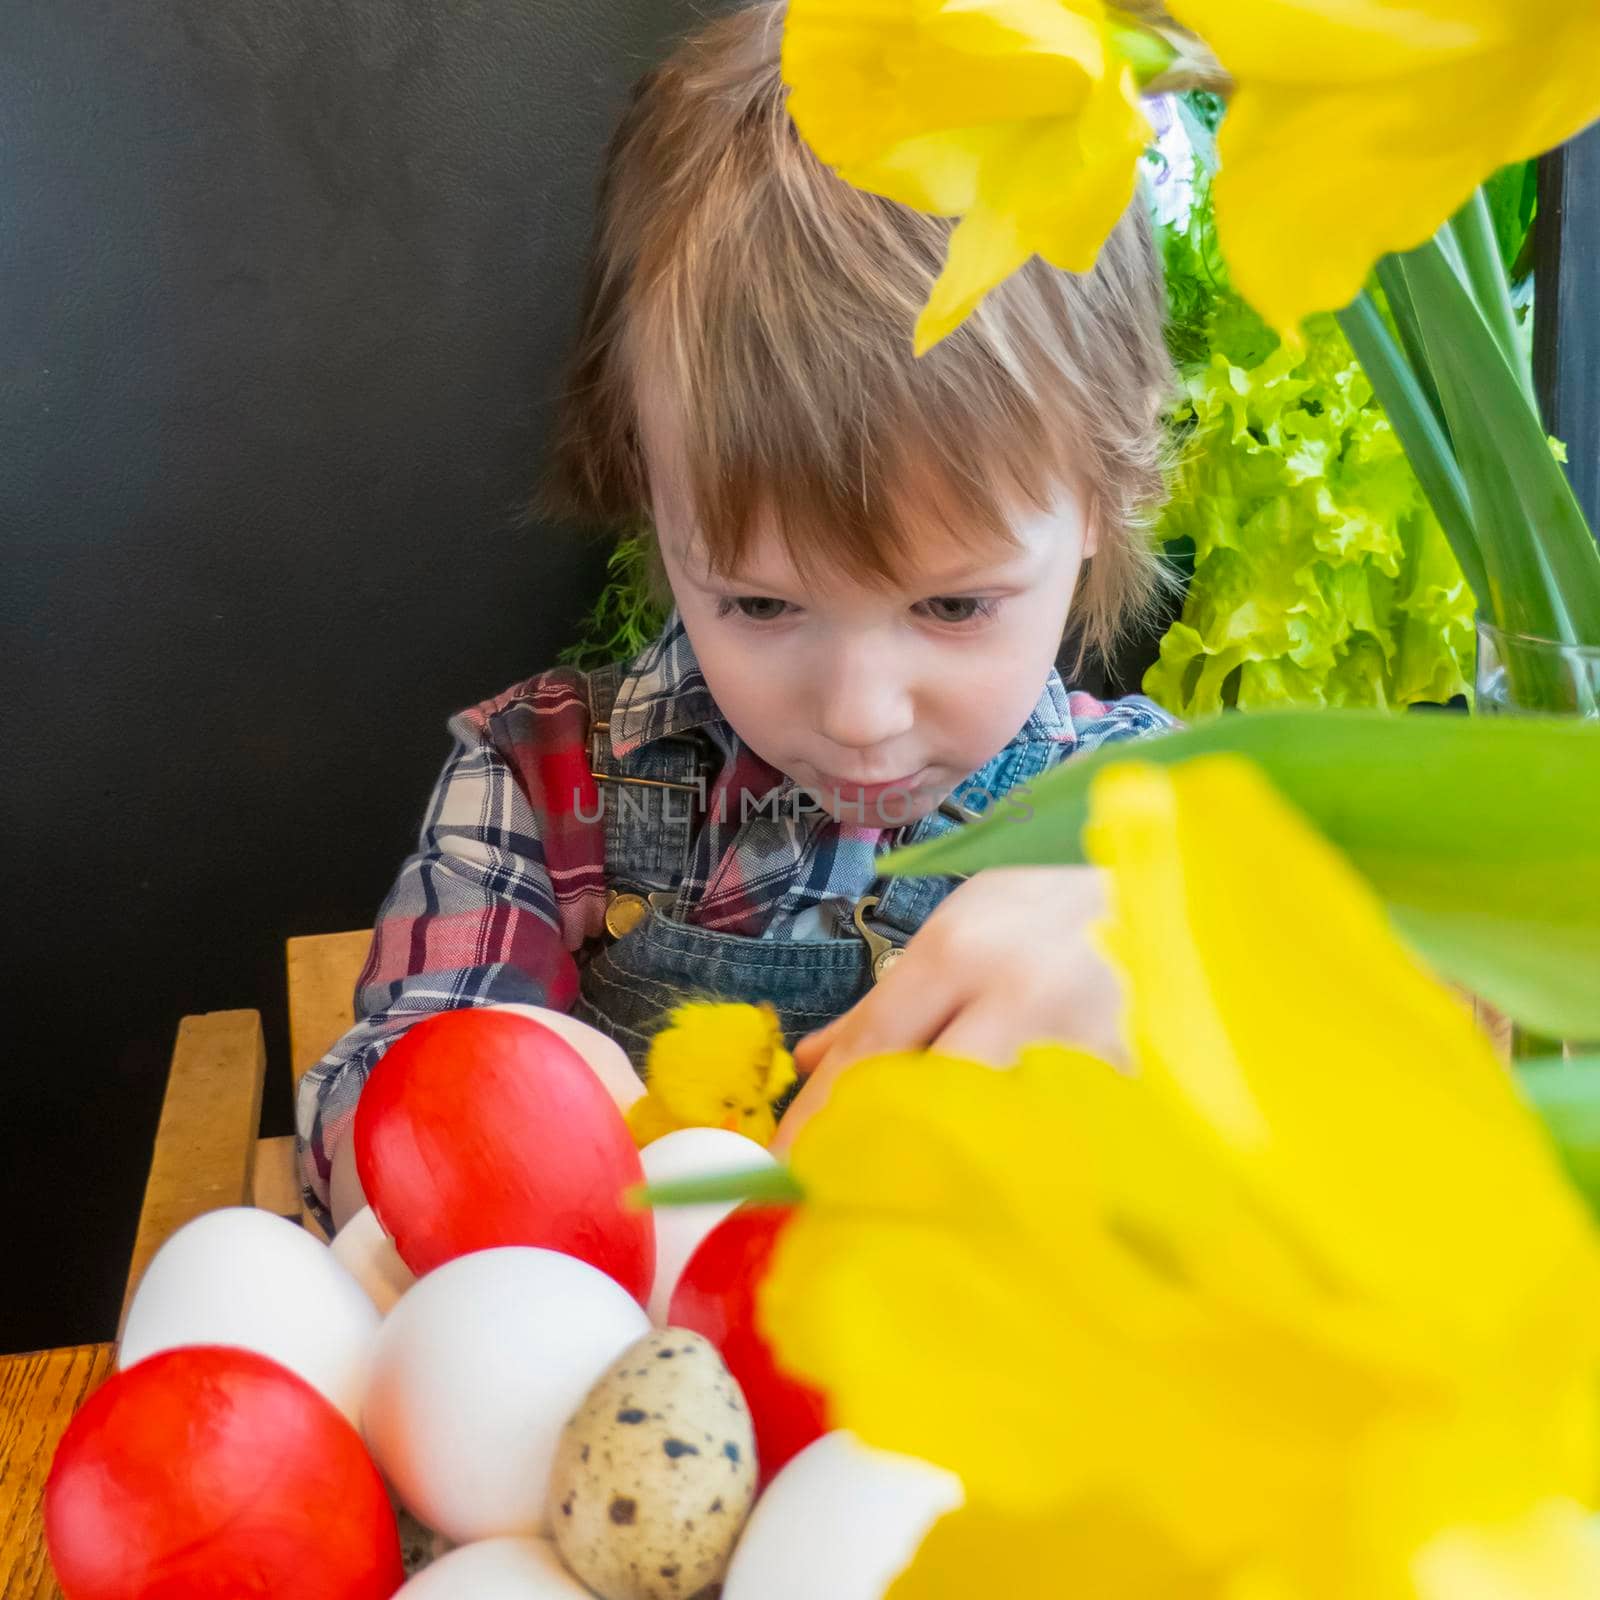 Preparation for Easter: a child plays with painted eggs in the kitchen among fresh greenery and flowers